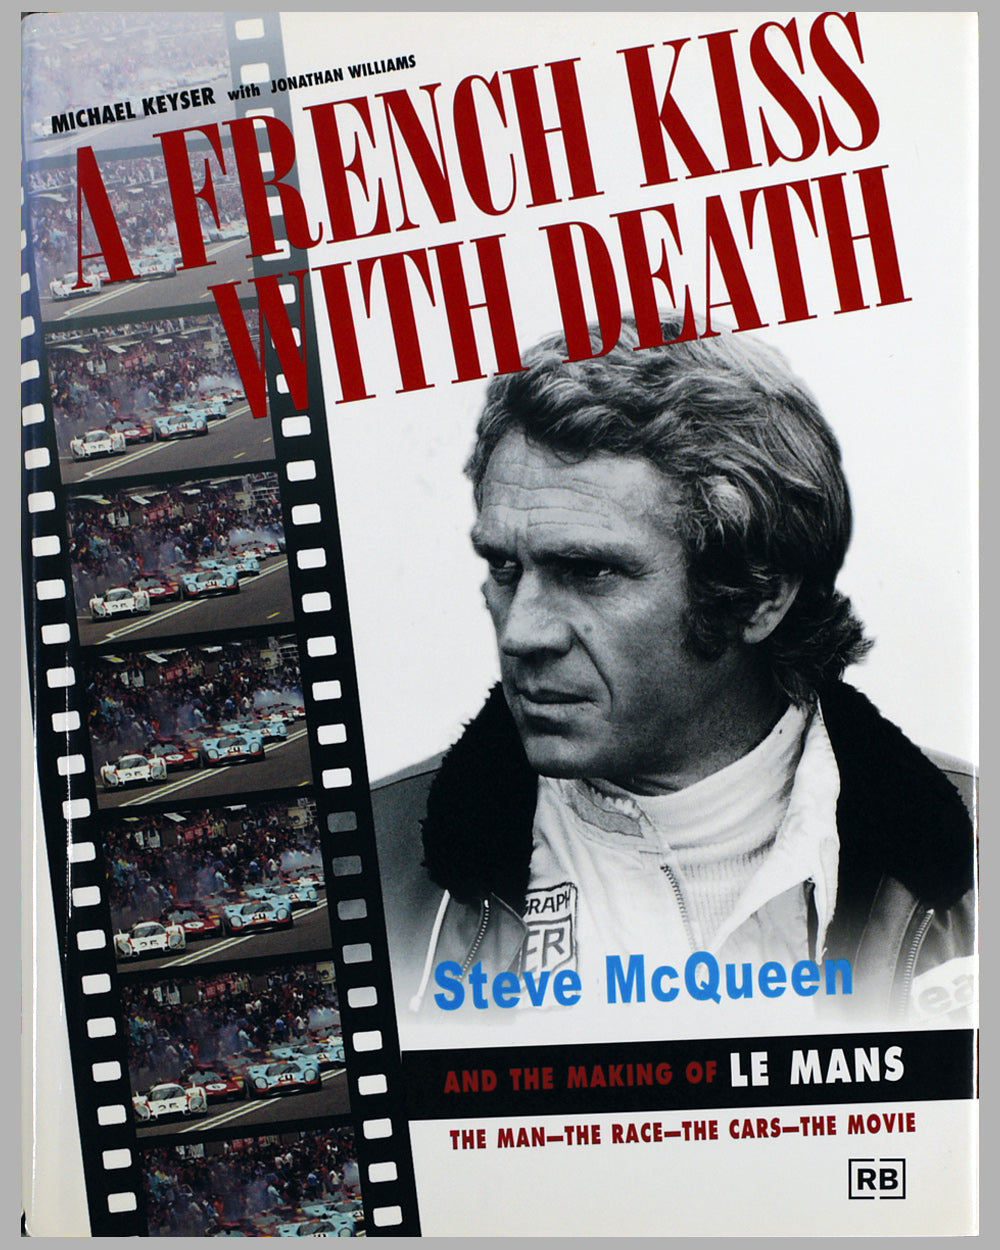 A French Kiss with Death - Steve McQueen and the Making of Le Mans book by Michael Keyser with Jonathan Williams, 1st ed. 1999